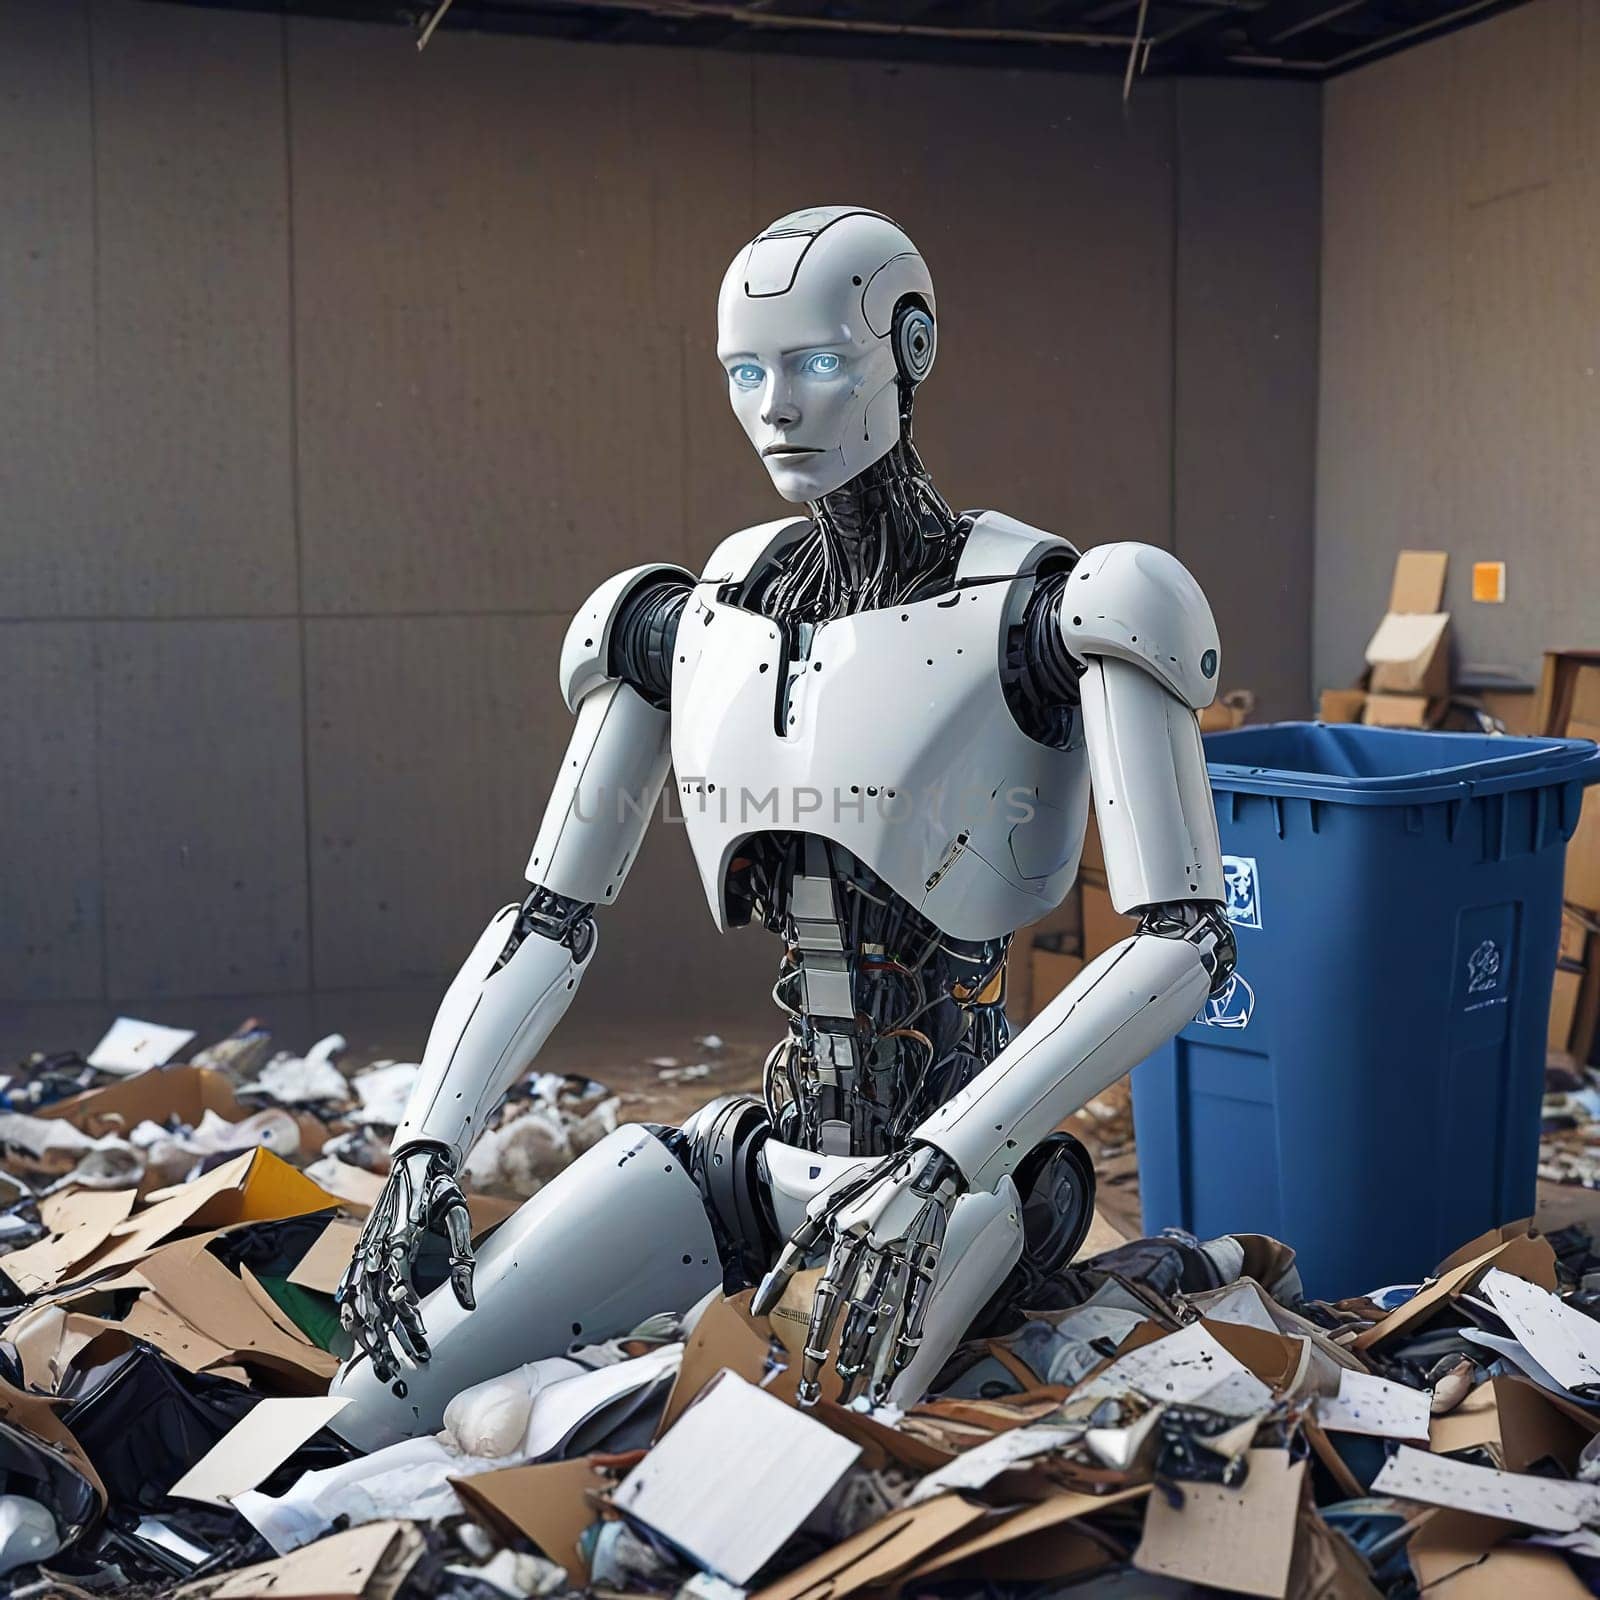 A broken robot in a mountain of garbage. . Portrait of a robot. Artificial intelligence. High quality photo. Artificial intelligence is taking over the world and replacing people at work.